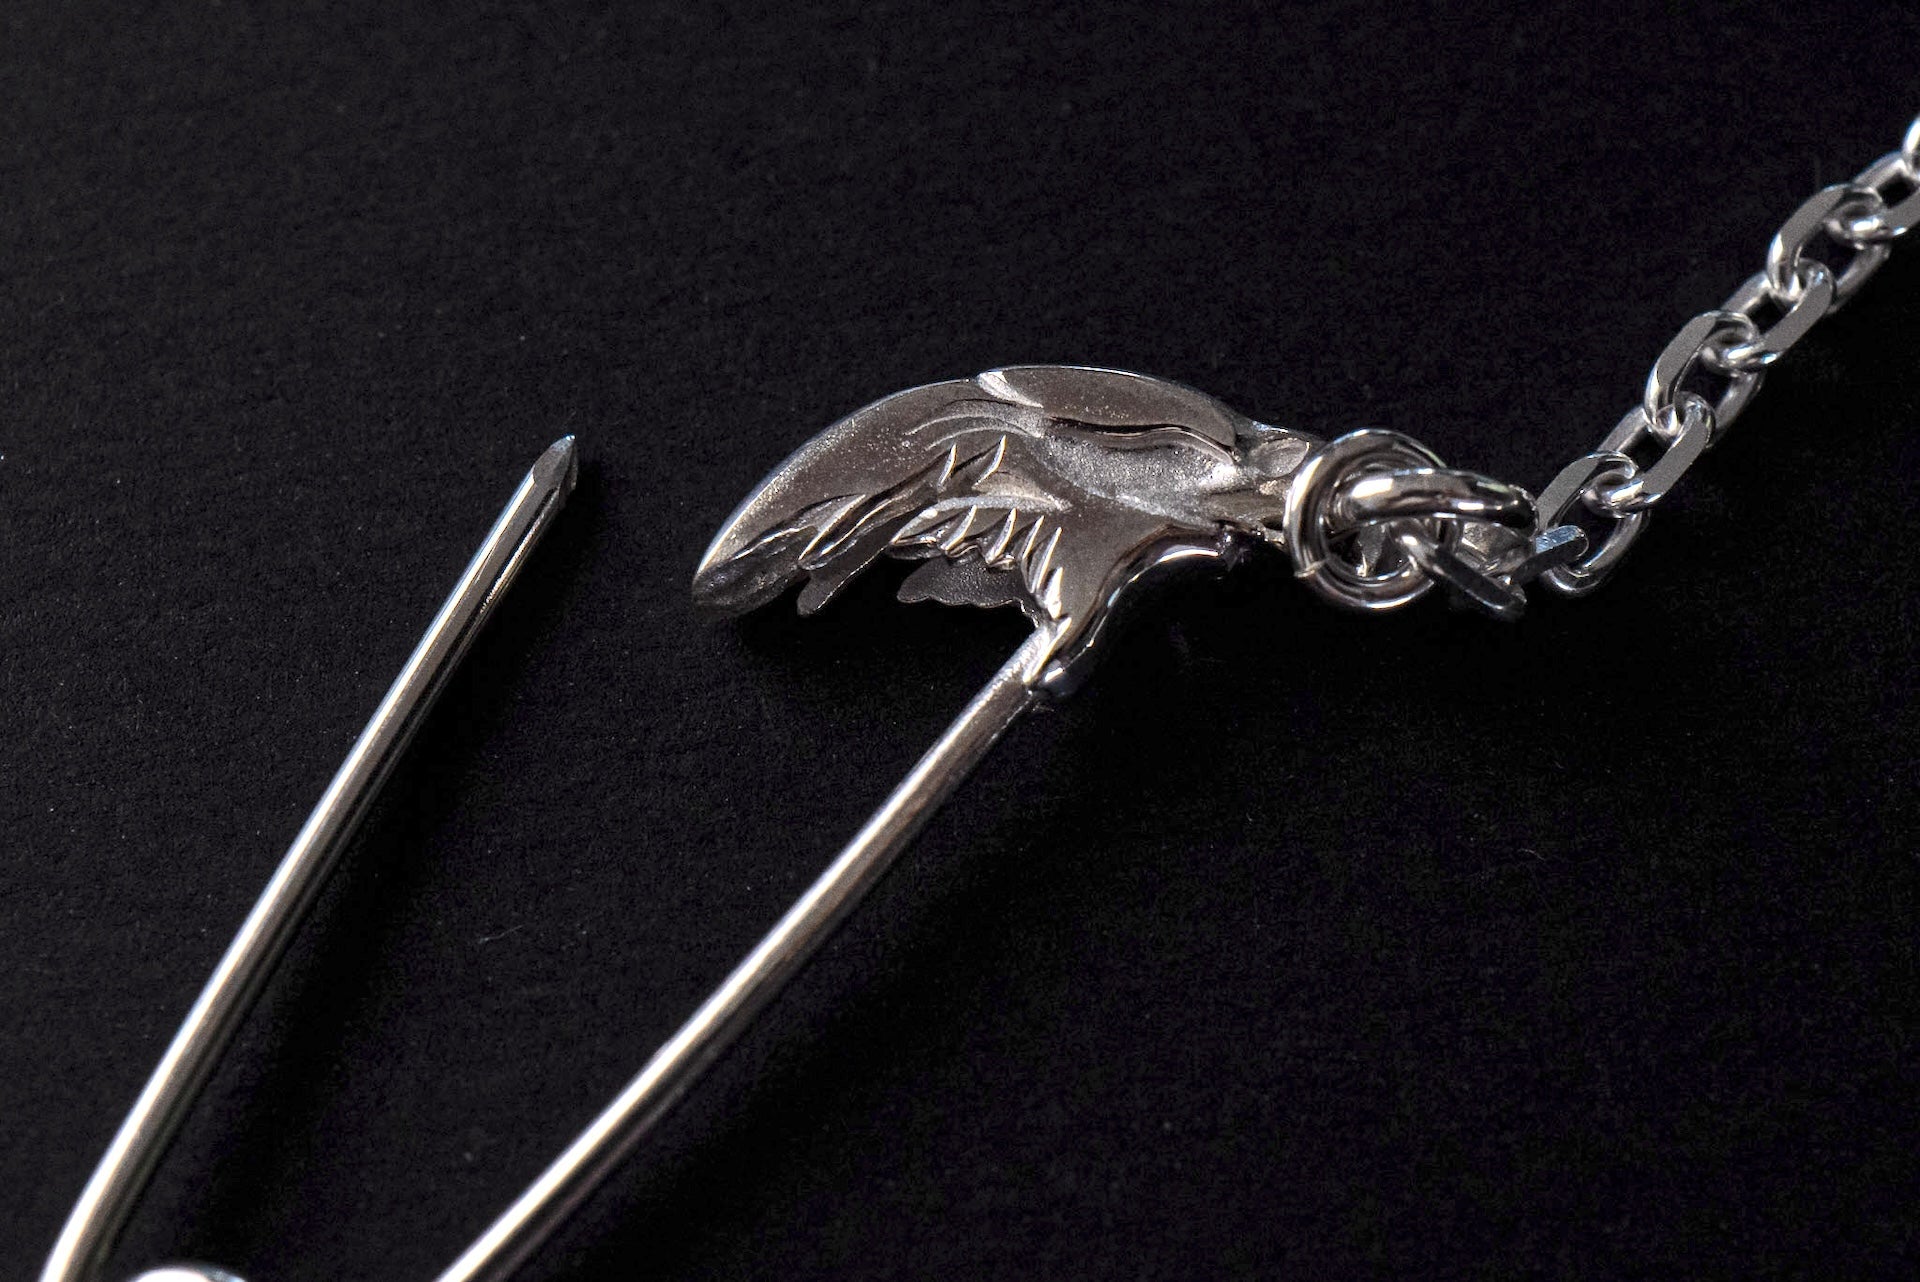 Legend Silver Necklace With Size Small "Eagle" Safety Pin